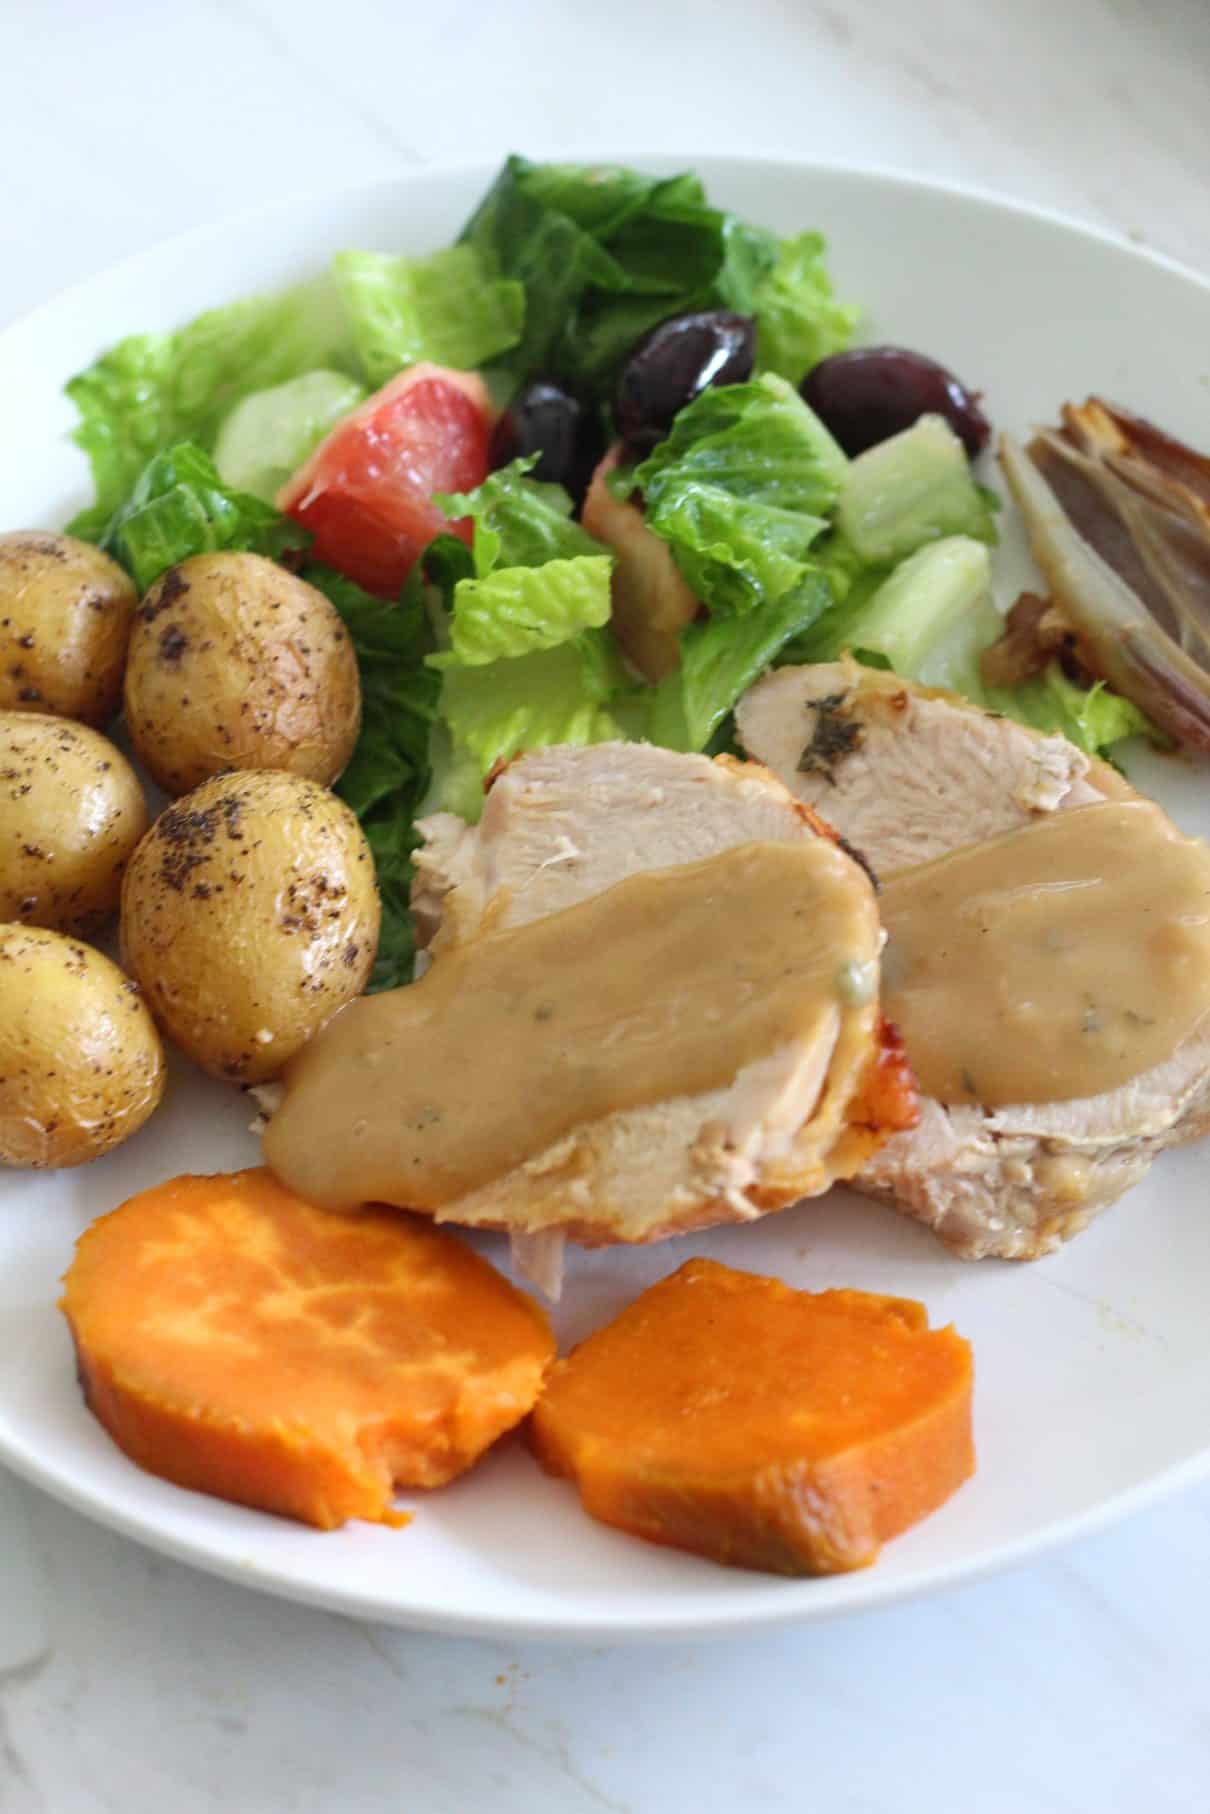 Served plate with roasted potatoes, roasted turkey breast slices, vegetables. Turkey breast slices are covered in gravy.